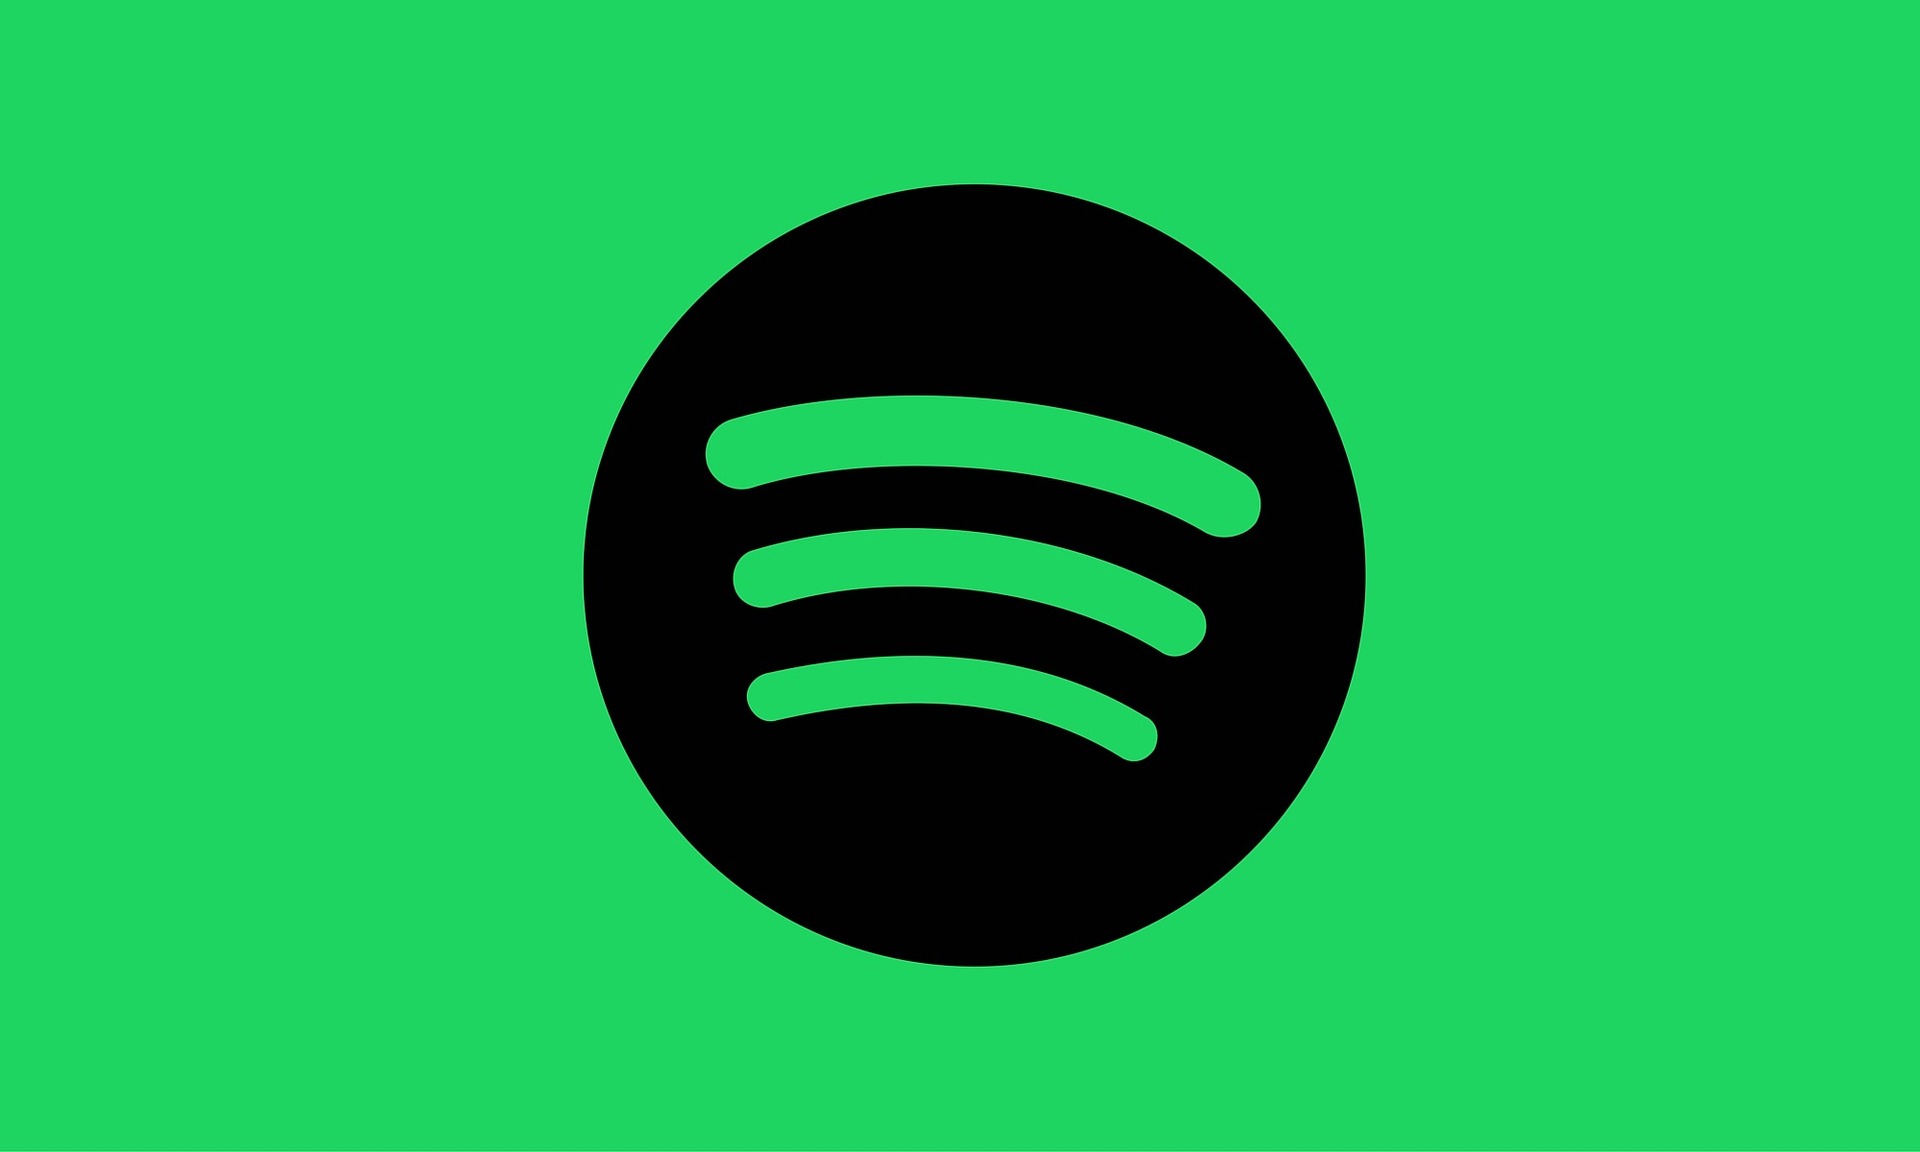 Spotify Premium APK- One of the Best Methods to Get Spotify Premium for Free